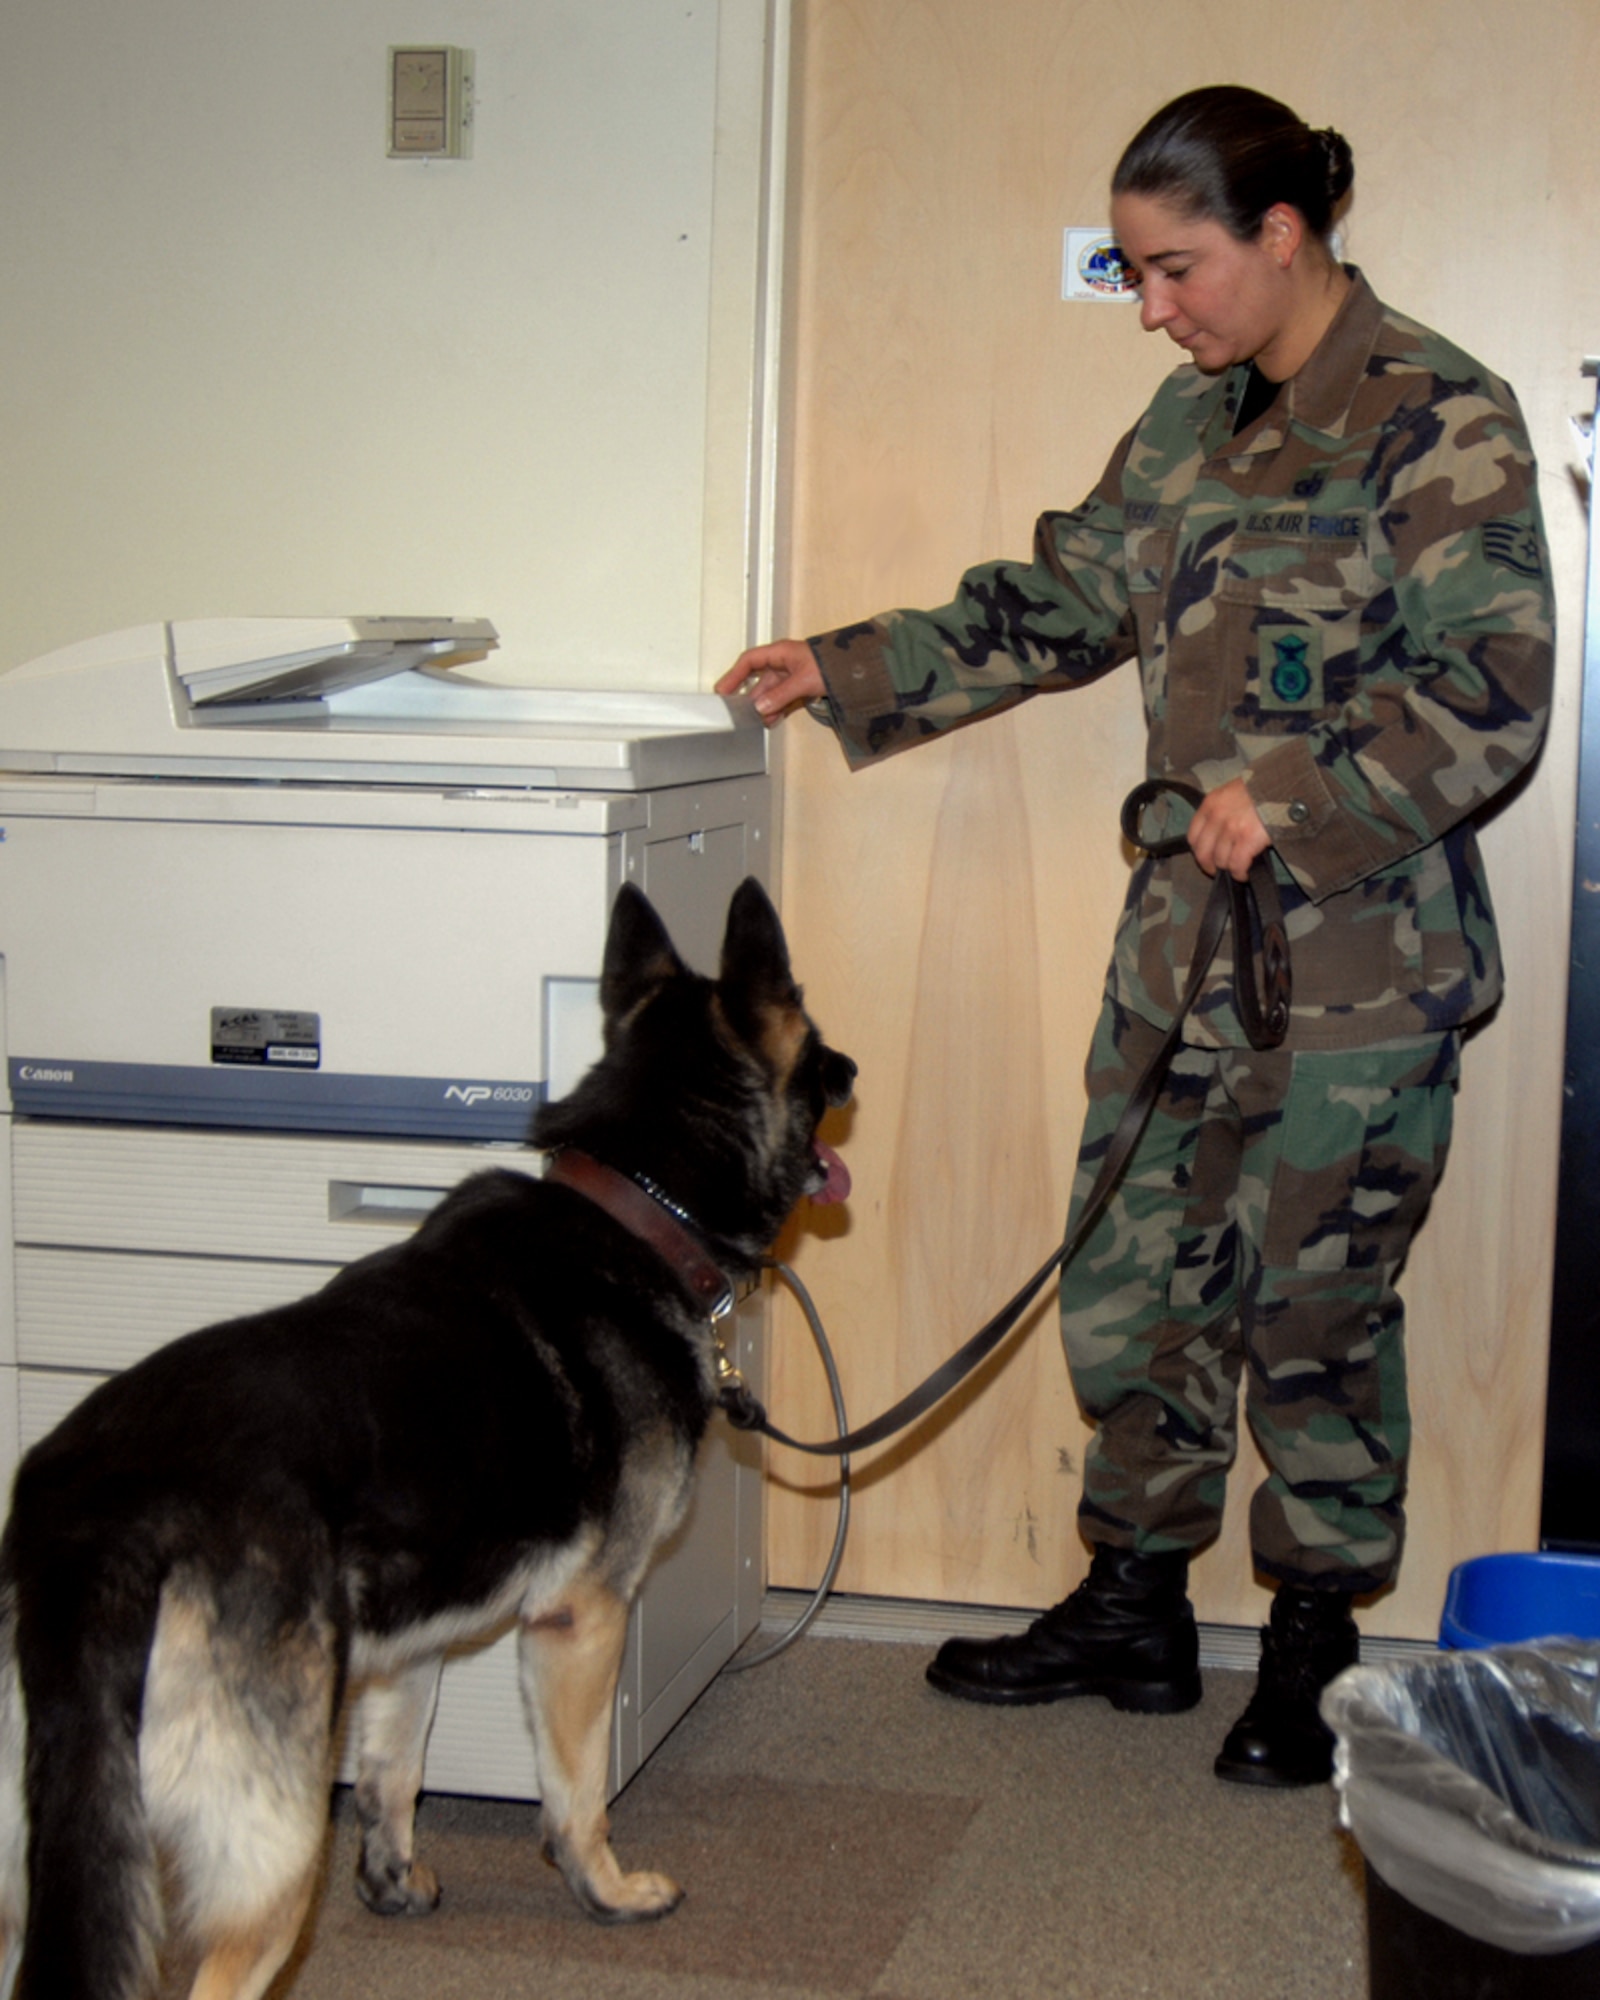 Staff Sergeant Jeanette Reichel, 66th Security Forces Squadron, and her Military Working Dog, Petya, a 6-year old German Sheppard, tattoo F-028 perform a search during her K-9 handler certification test. Sergeant Reichel entered the Hanscom history books on March 21 as the first female dog handler here in the past two decades after successfully completing her certification. (U.S. Air Force Photo by Linda LaBonte Britt)